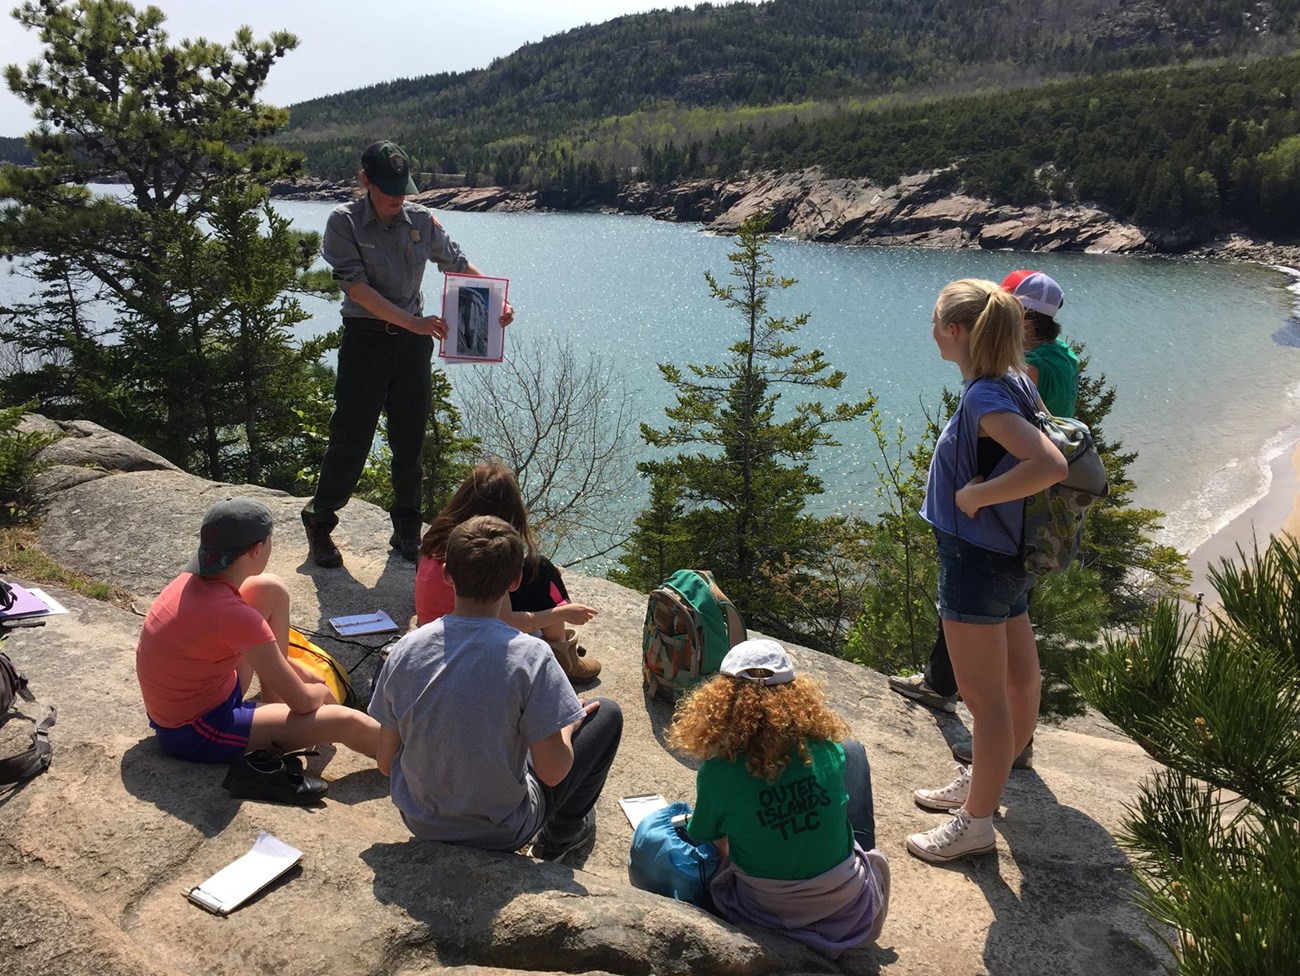 a ranger talking with students on a rocky overlook with ocean and beach below